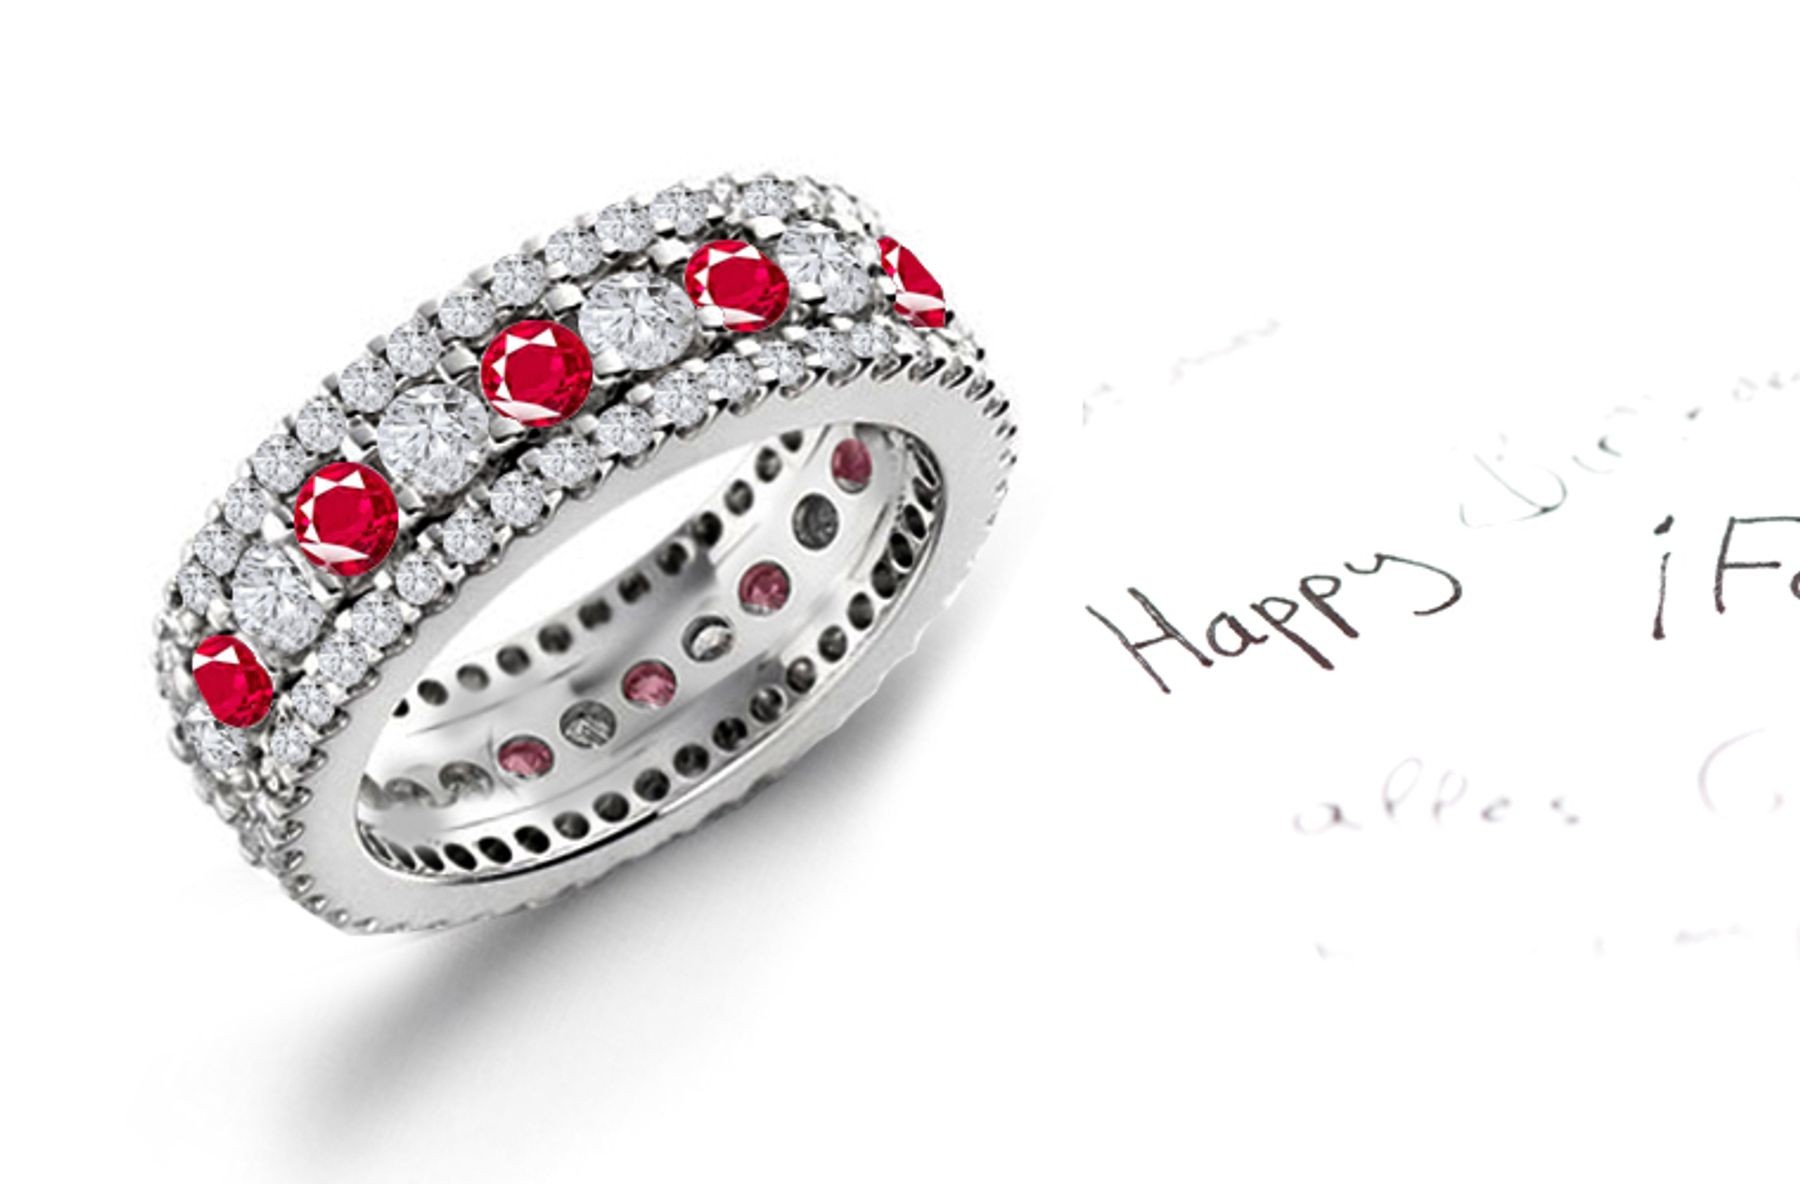 Exceptional: Three Sparkling Rows of Ruby & Diamond Eternity Bands in Platinum 950 Size 3 to 6